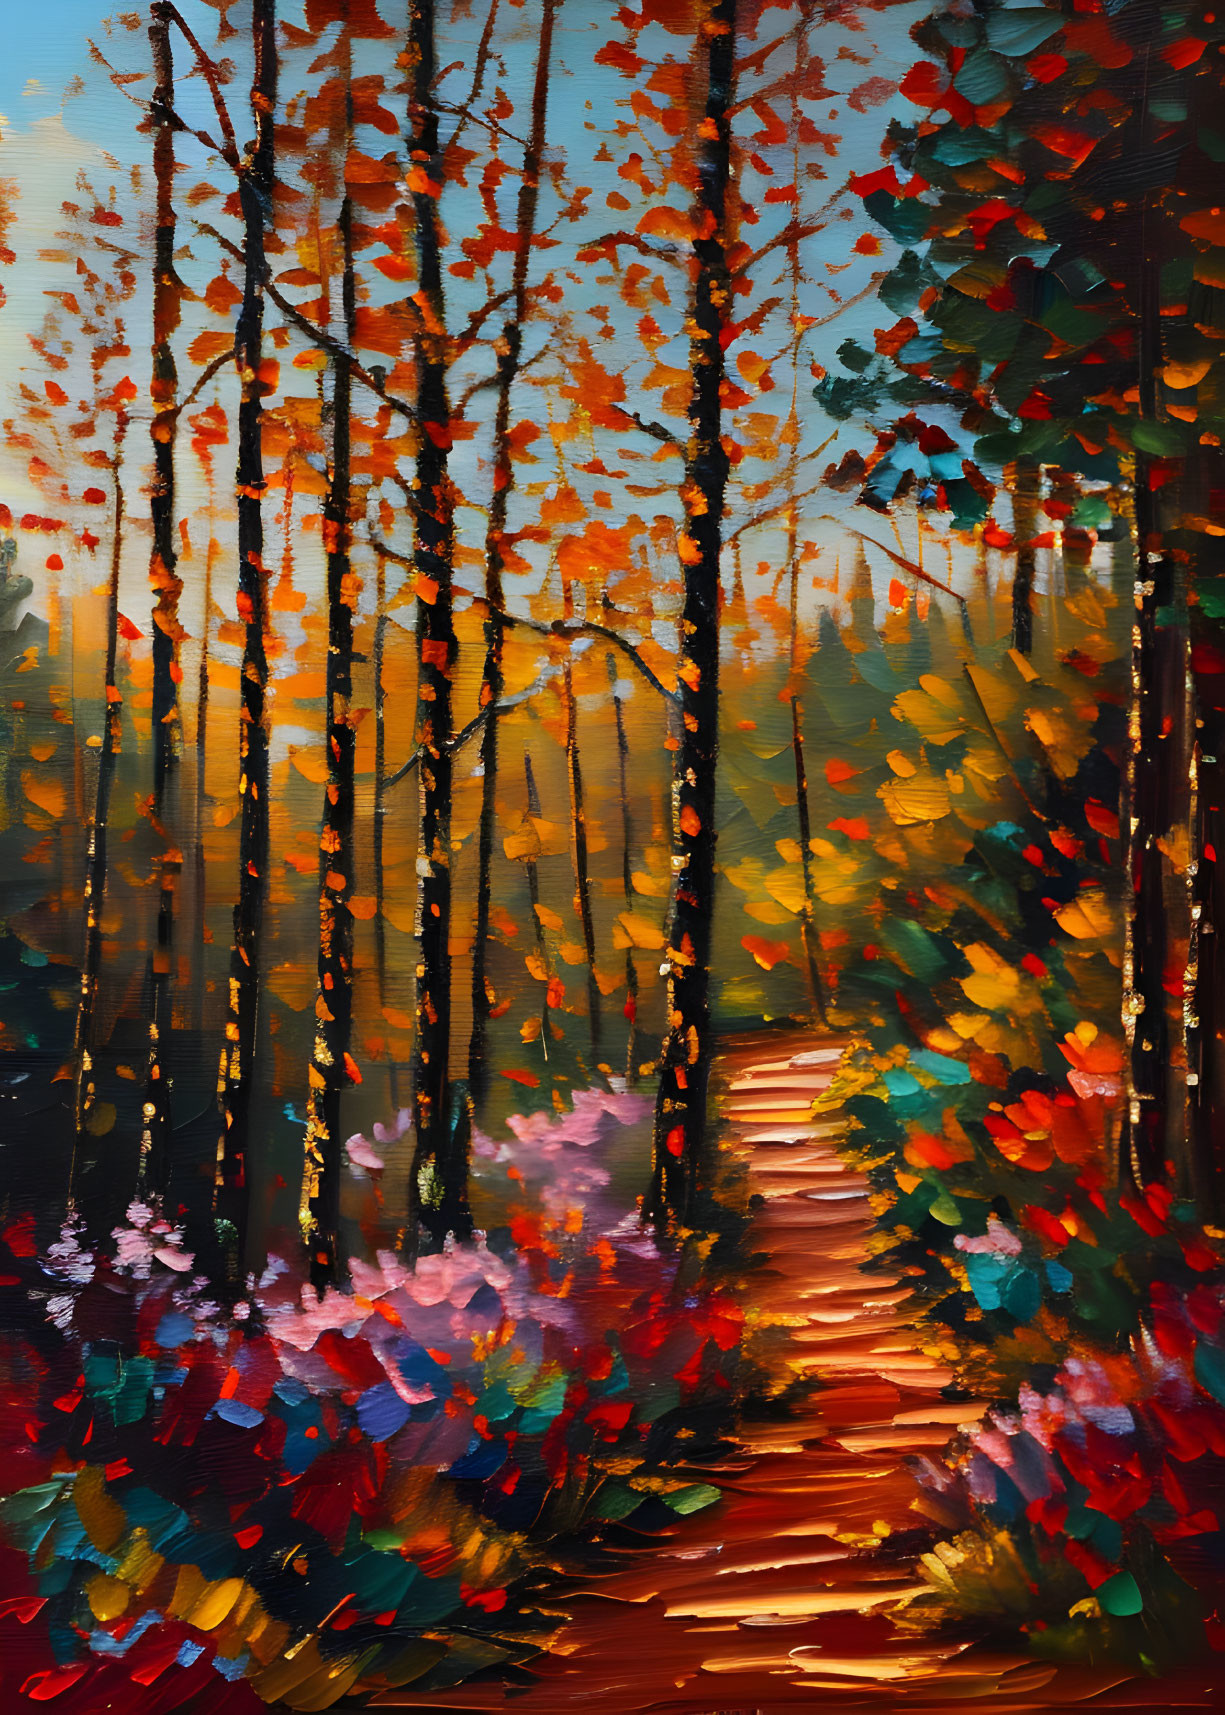 Oil Painting in The Autumn Forest